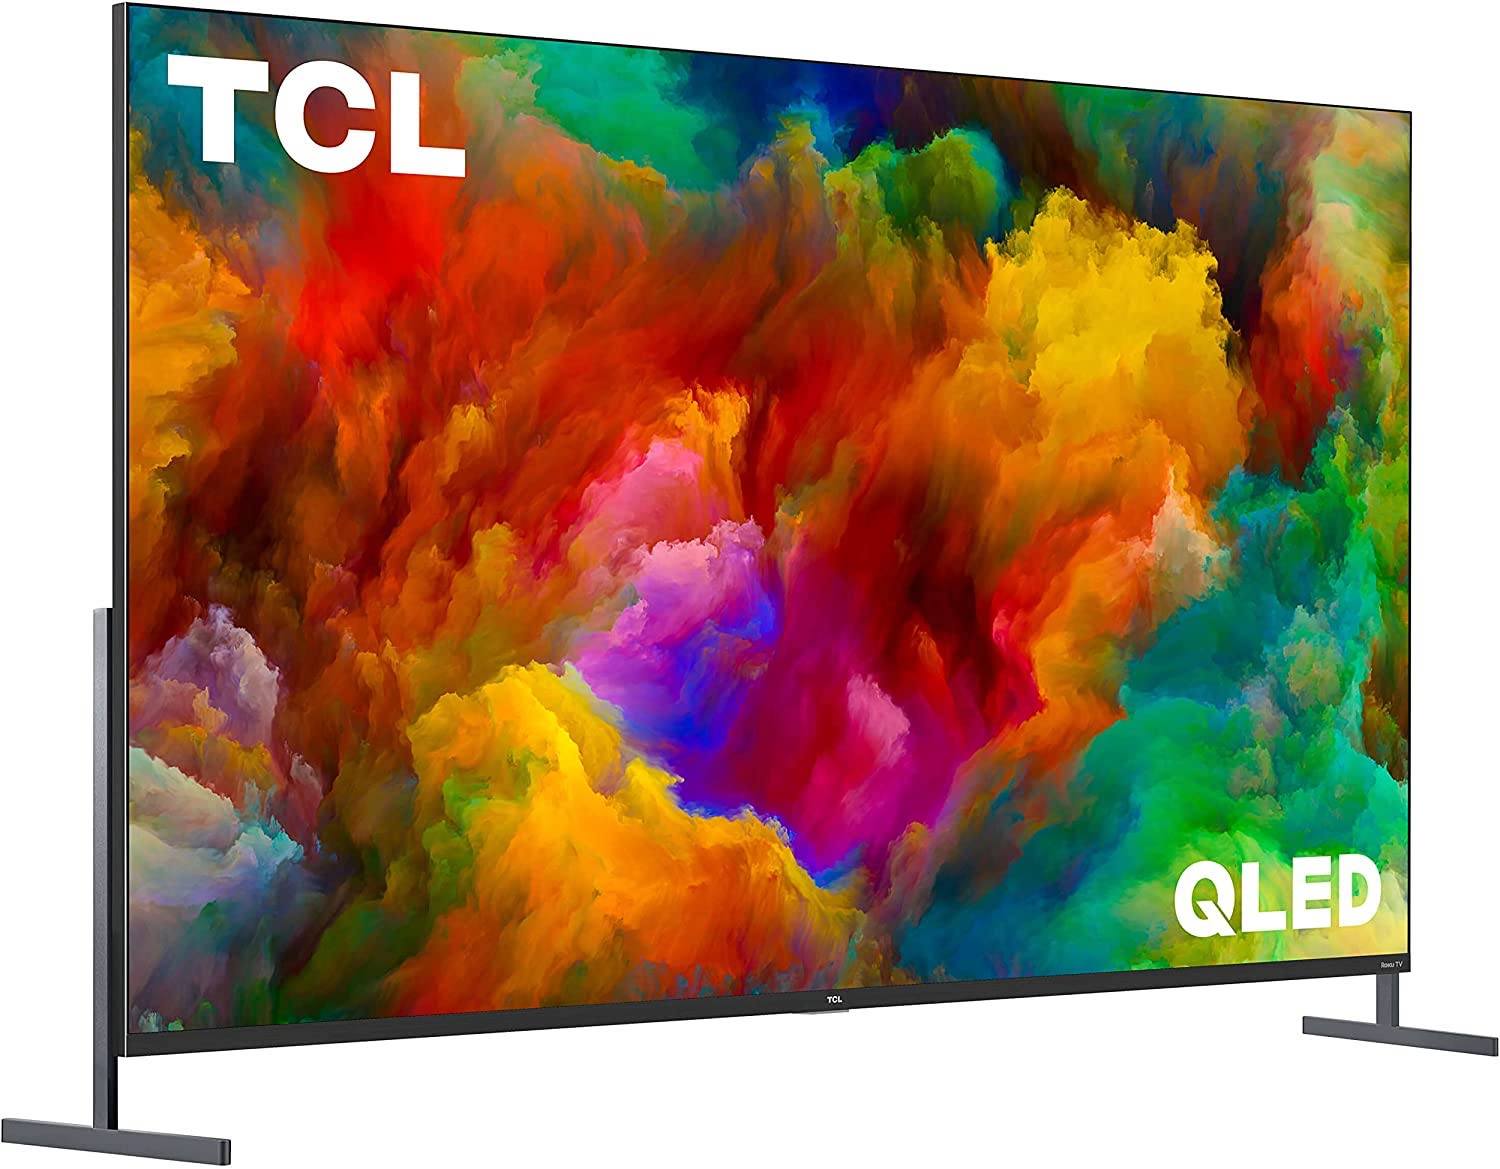 Early Black Friday: Get TCL Roku TVs on Sale Now